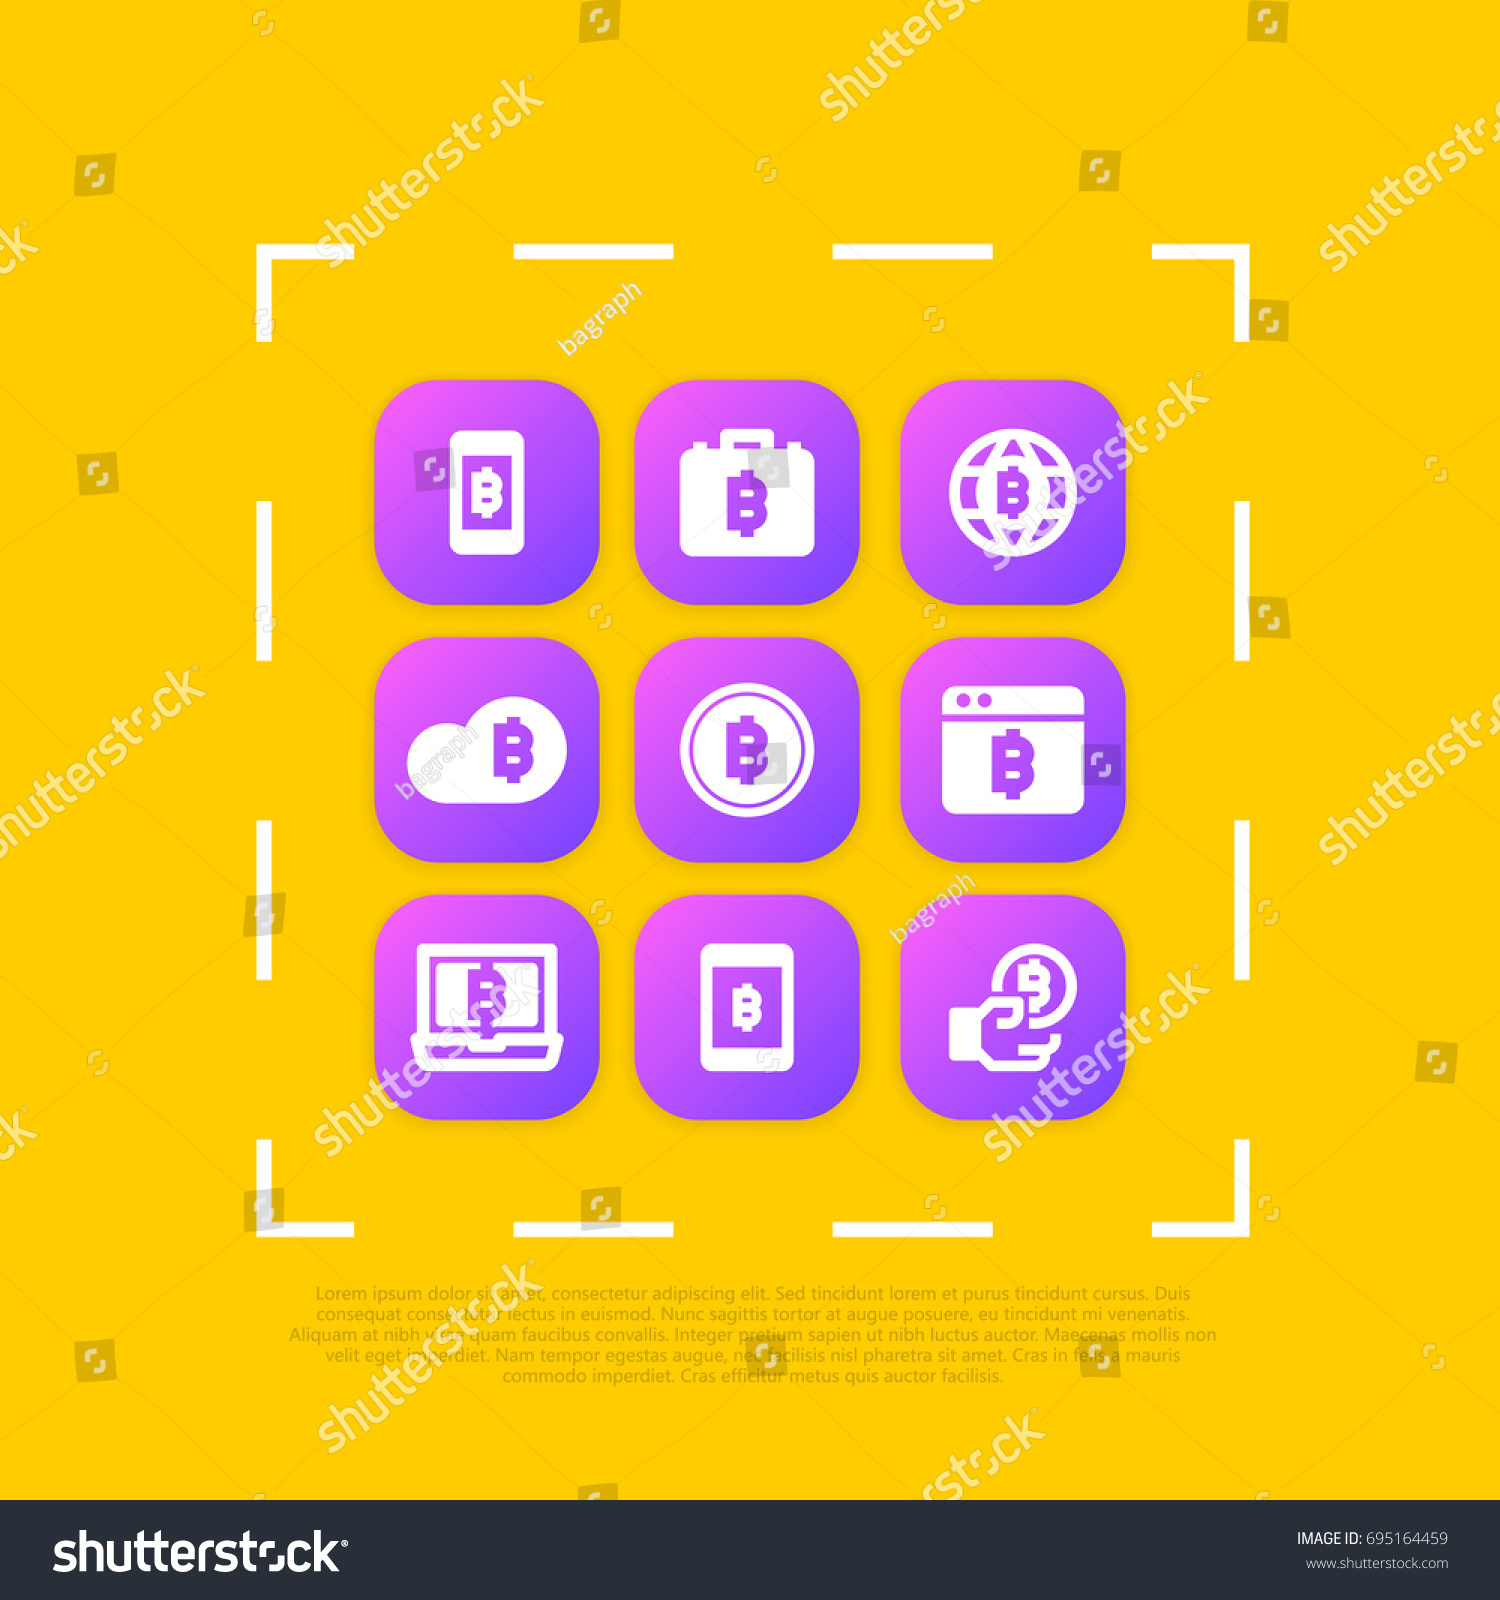 SVG of Bitcoin or Blockchain. App icon set. Vector favicon glyph clipart. Square rounded rectangular. Contains  mobile, briefcase, globe network, and more. Compatible with PNG, JPG, AI, CDR, SVG, EPS, PDF. svg